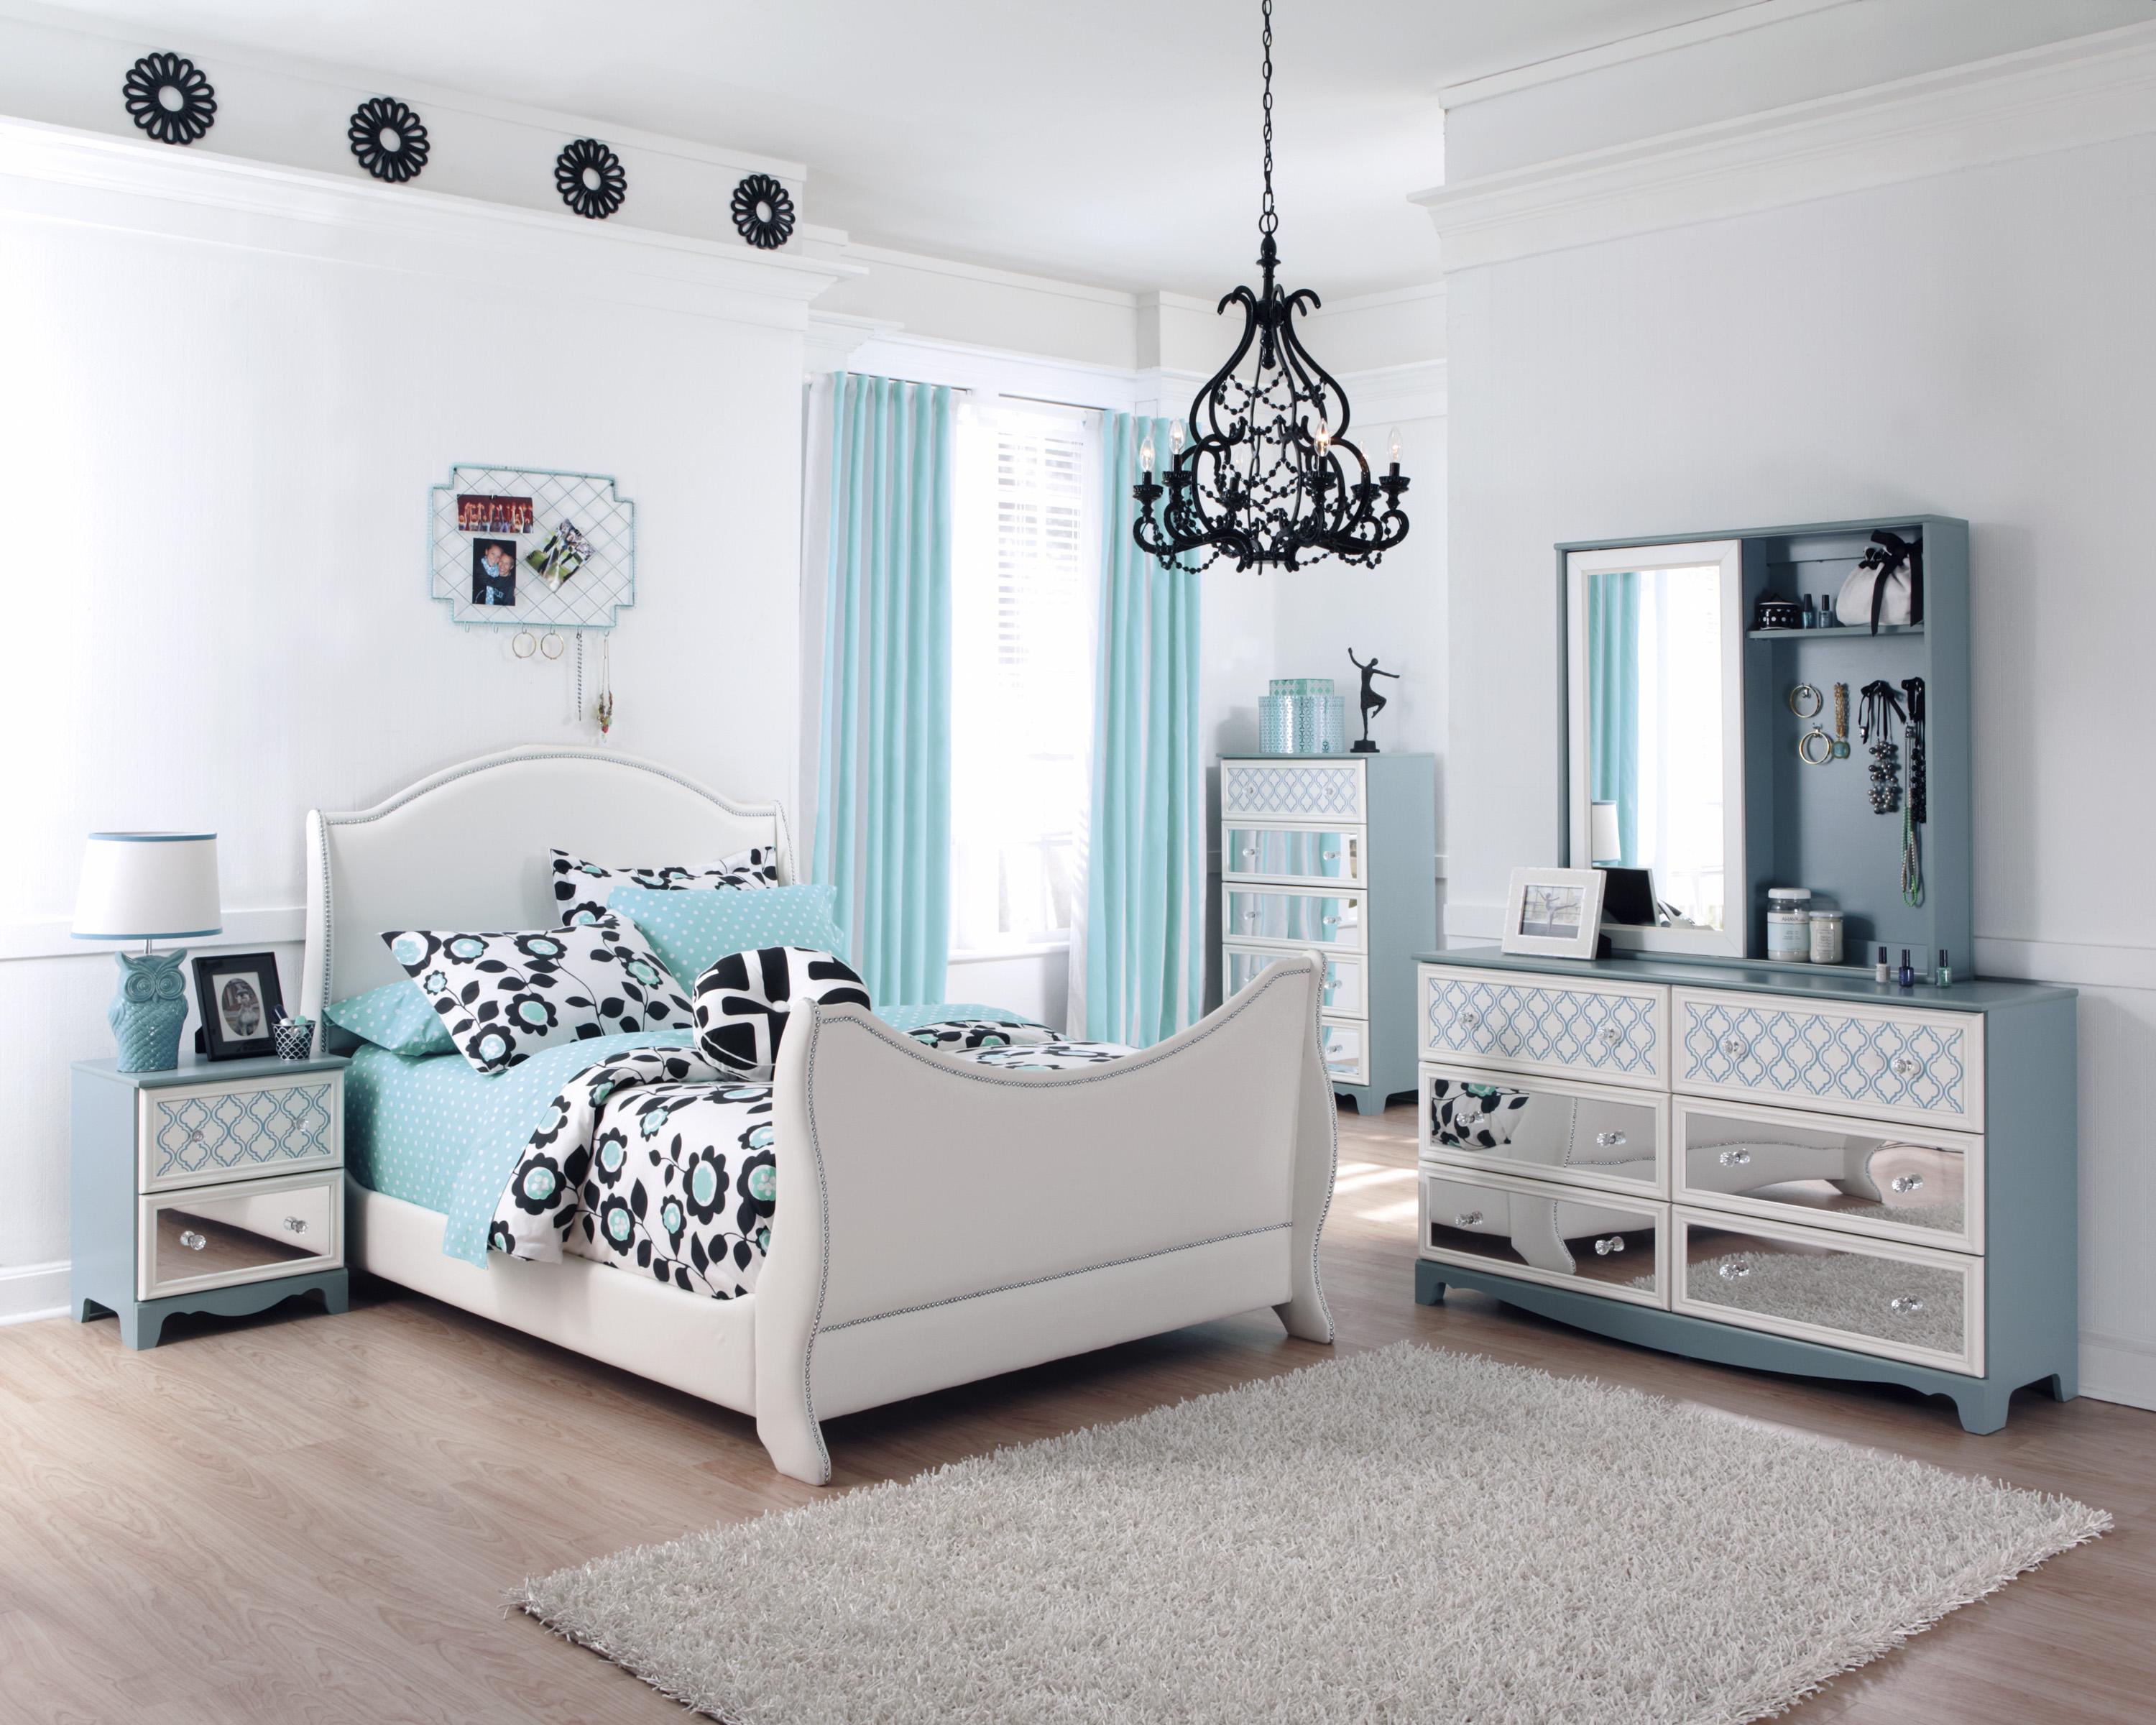 breathtaking white paint wooden furniture teenagers bedroom colorful paint sets for youth bedrooms fascinating teen bedroom decorating ideas with light